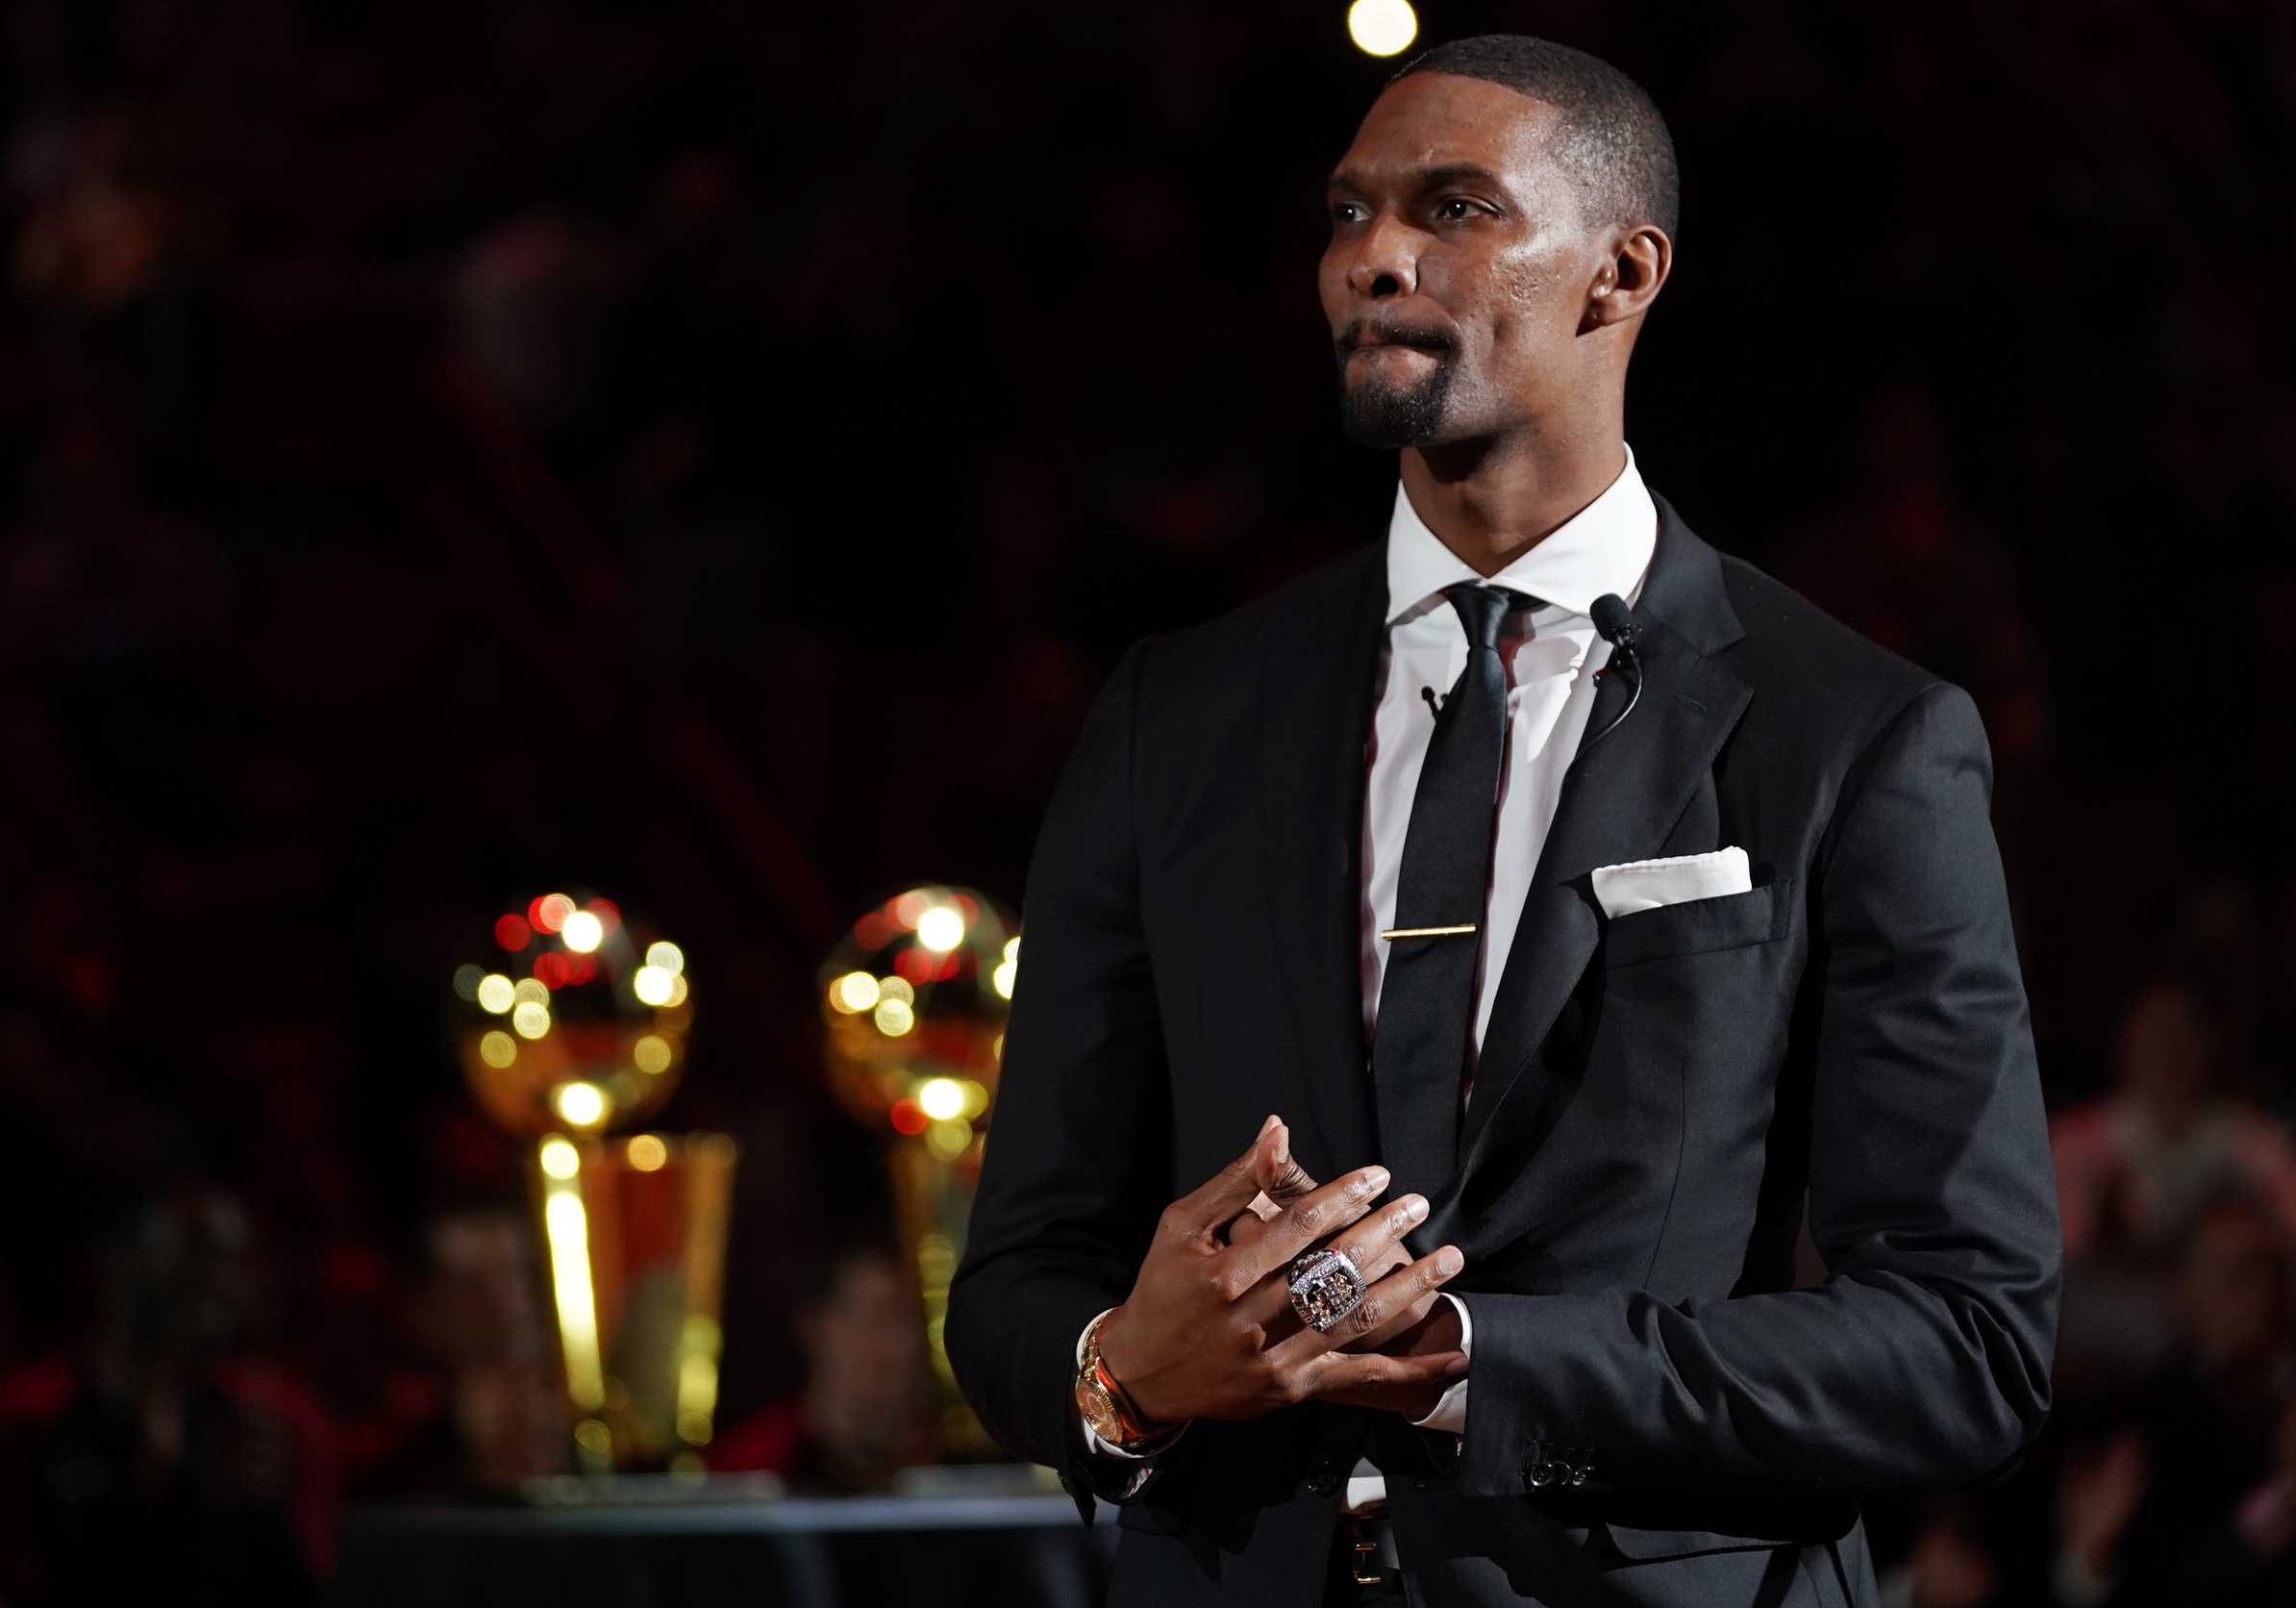 Former Heat standout Chris Bosh not among finalists for 2020 Hall of Fame